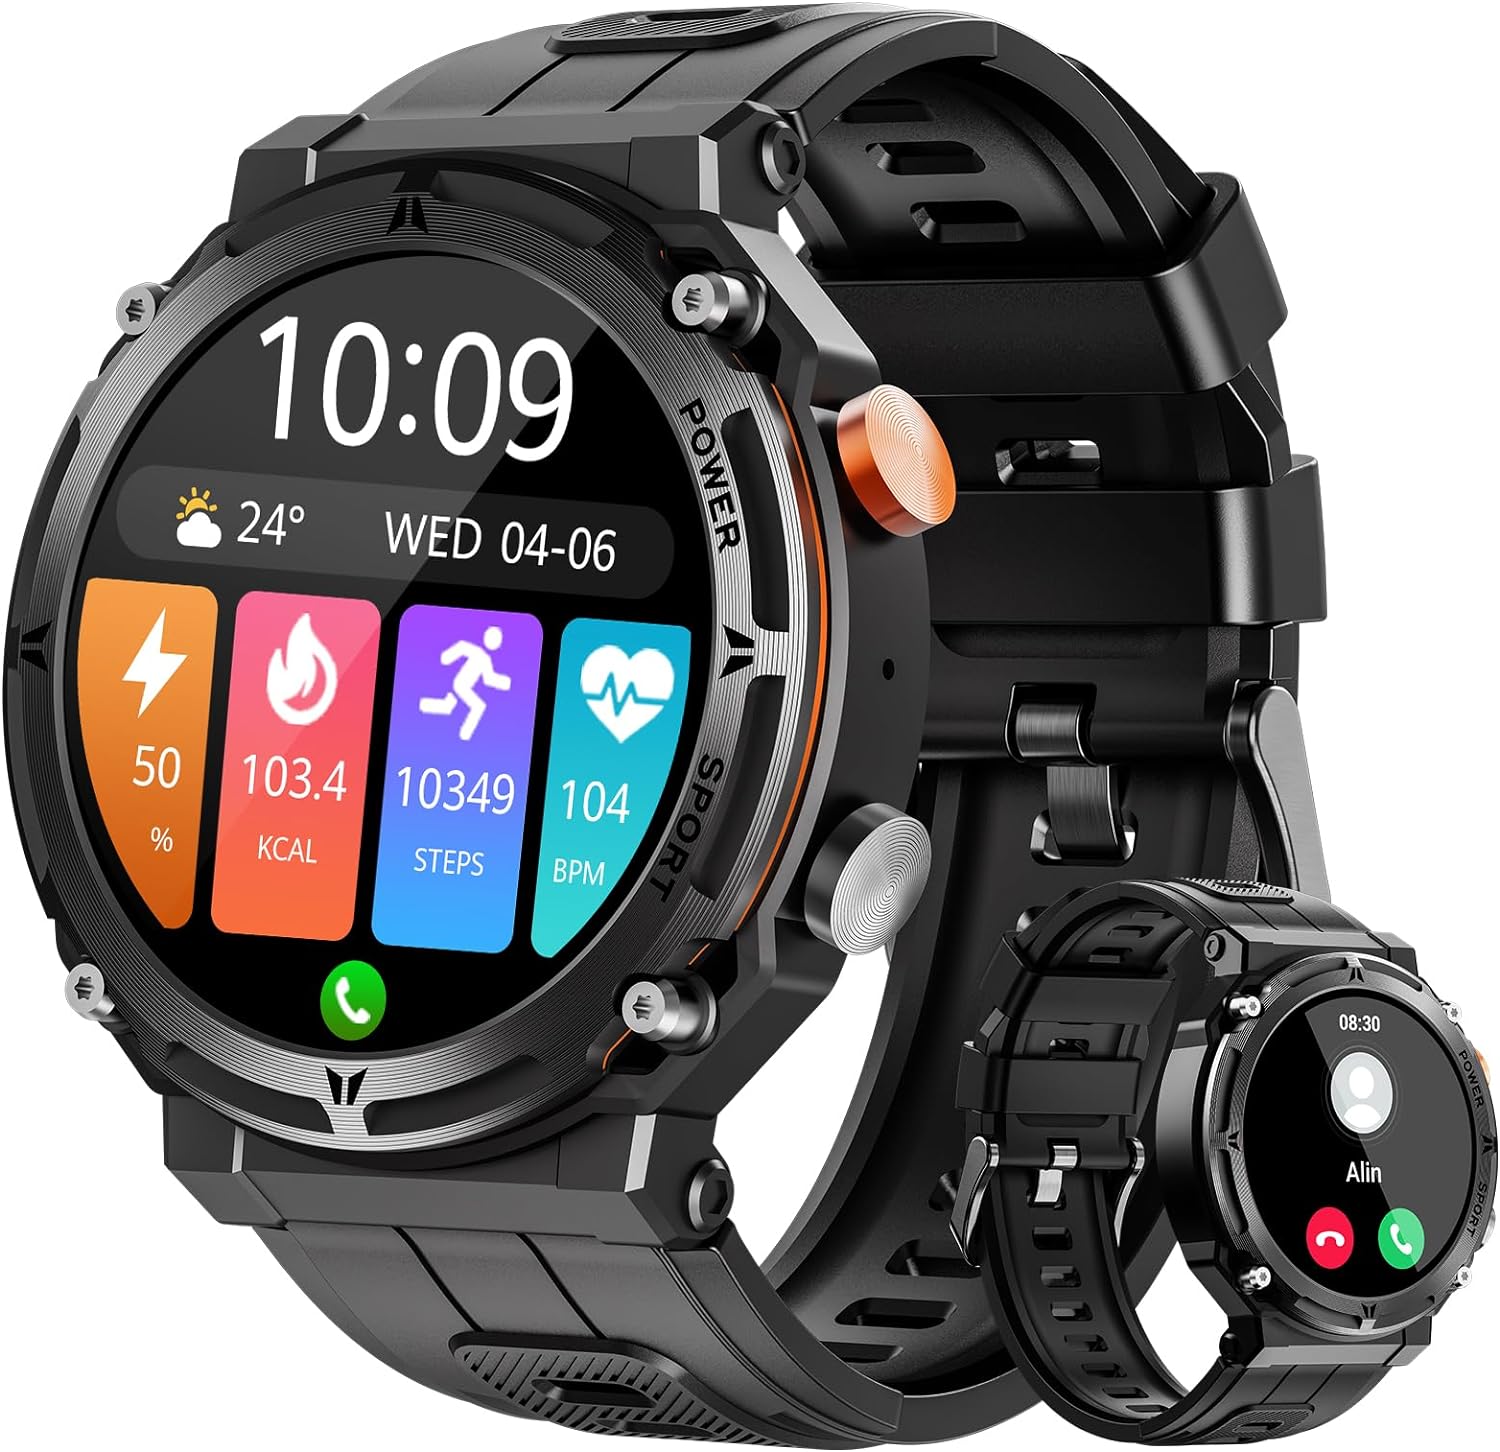 Military Smart Watches for Men, 5ATM Waterproof Rugged Smart Watch with Bluetooth Call (Answer/Dial Call), 1.39” HD IP68 Fitness Tracker Watch with 100+ Sport Modes for Android/iOS Phone